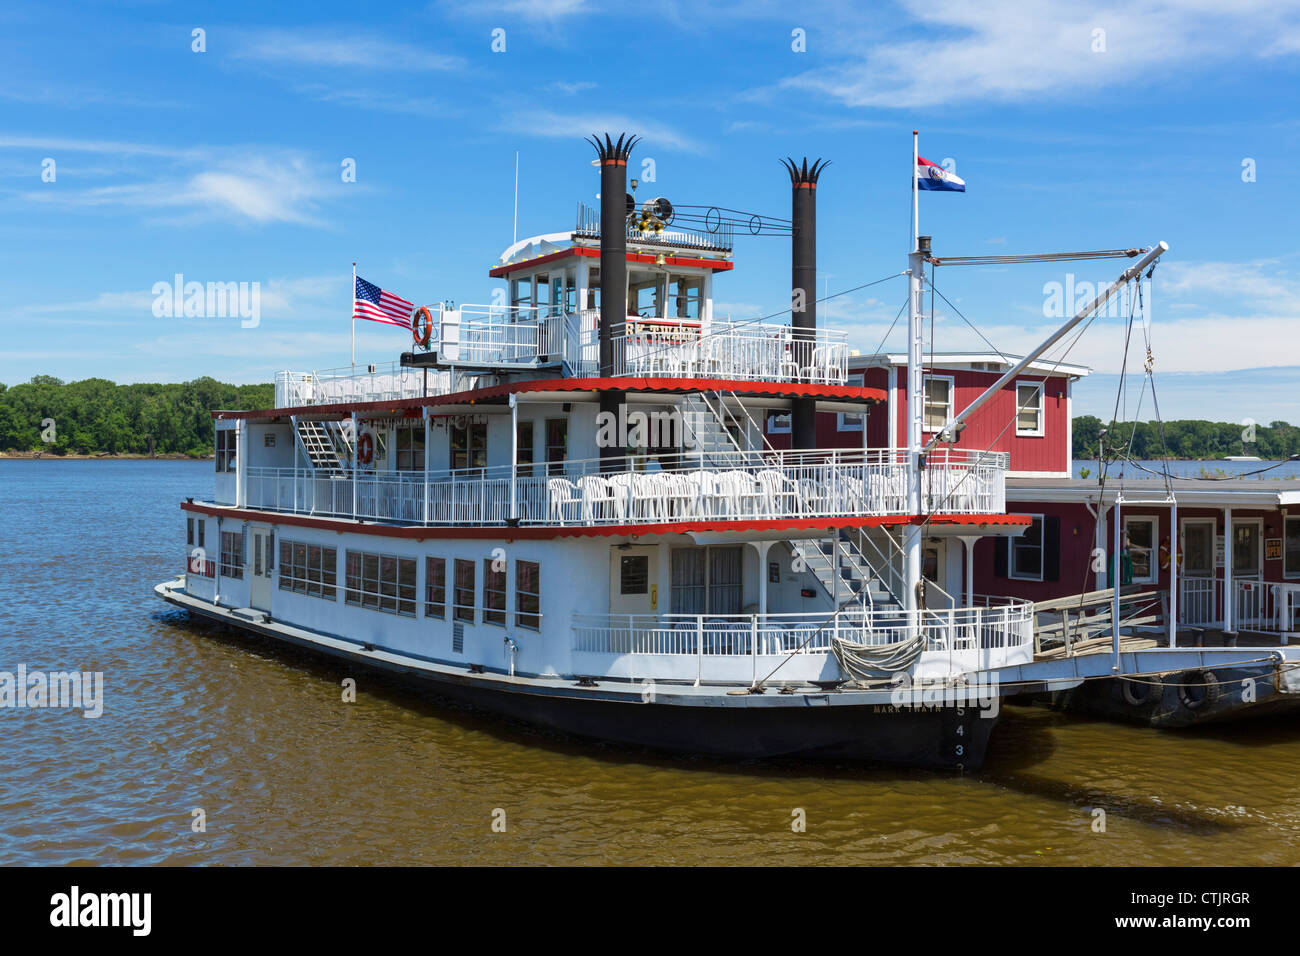 The Mark Twain riverboat moored on the Mississippi River in Hannibal, Missouri, home town of Mark Twain, USA Stock Photo